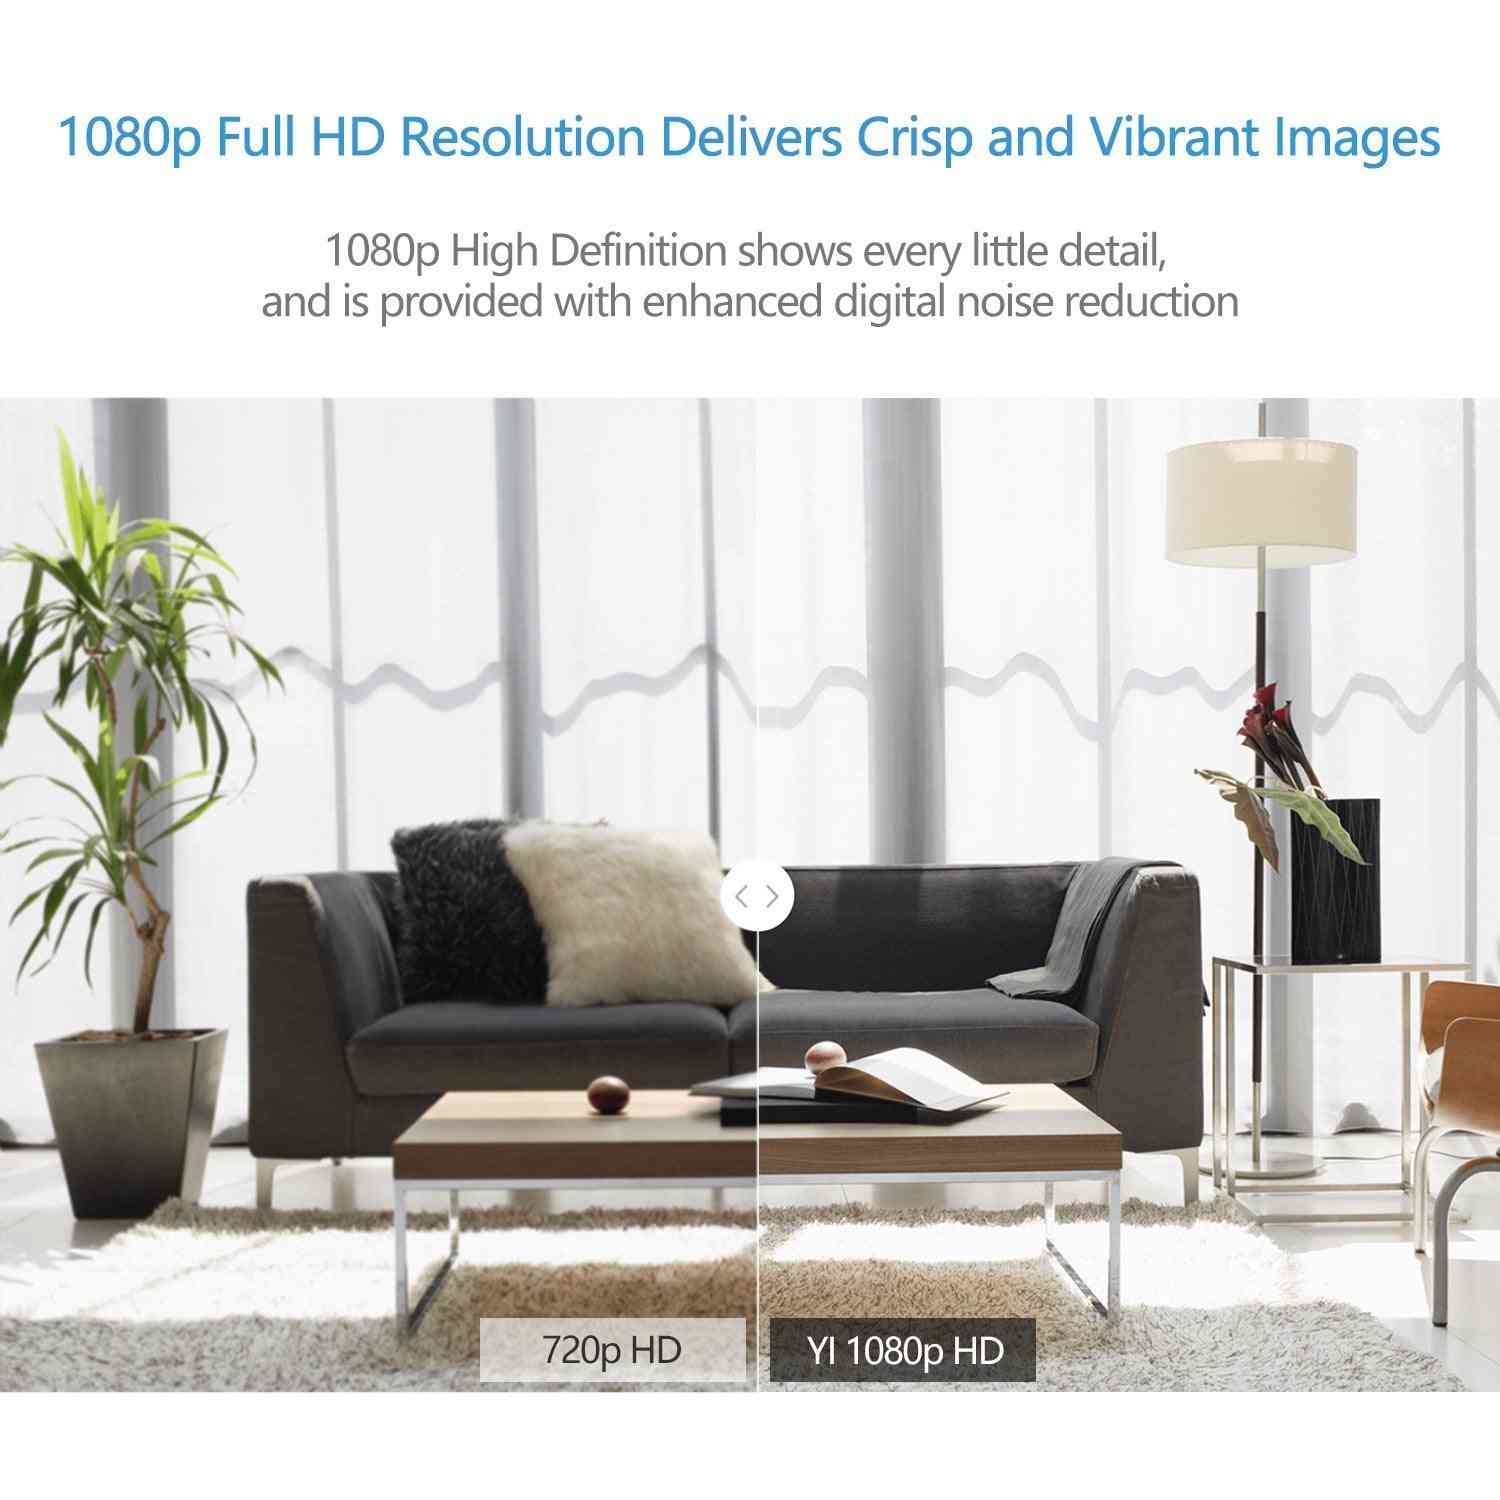 1080p Hd Ai Based Smart Home Security Camera - Wireless Ip Cam + Night Vision - Android Cloud Surveillance Cameras